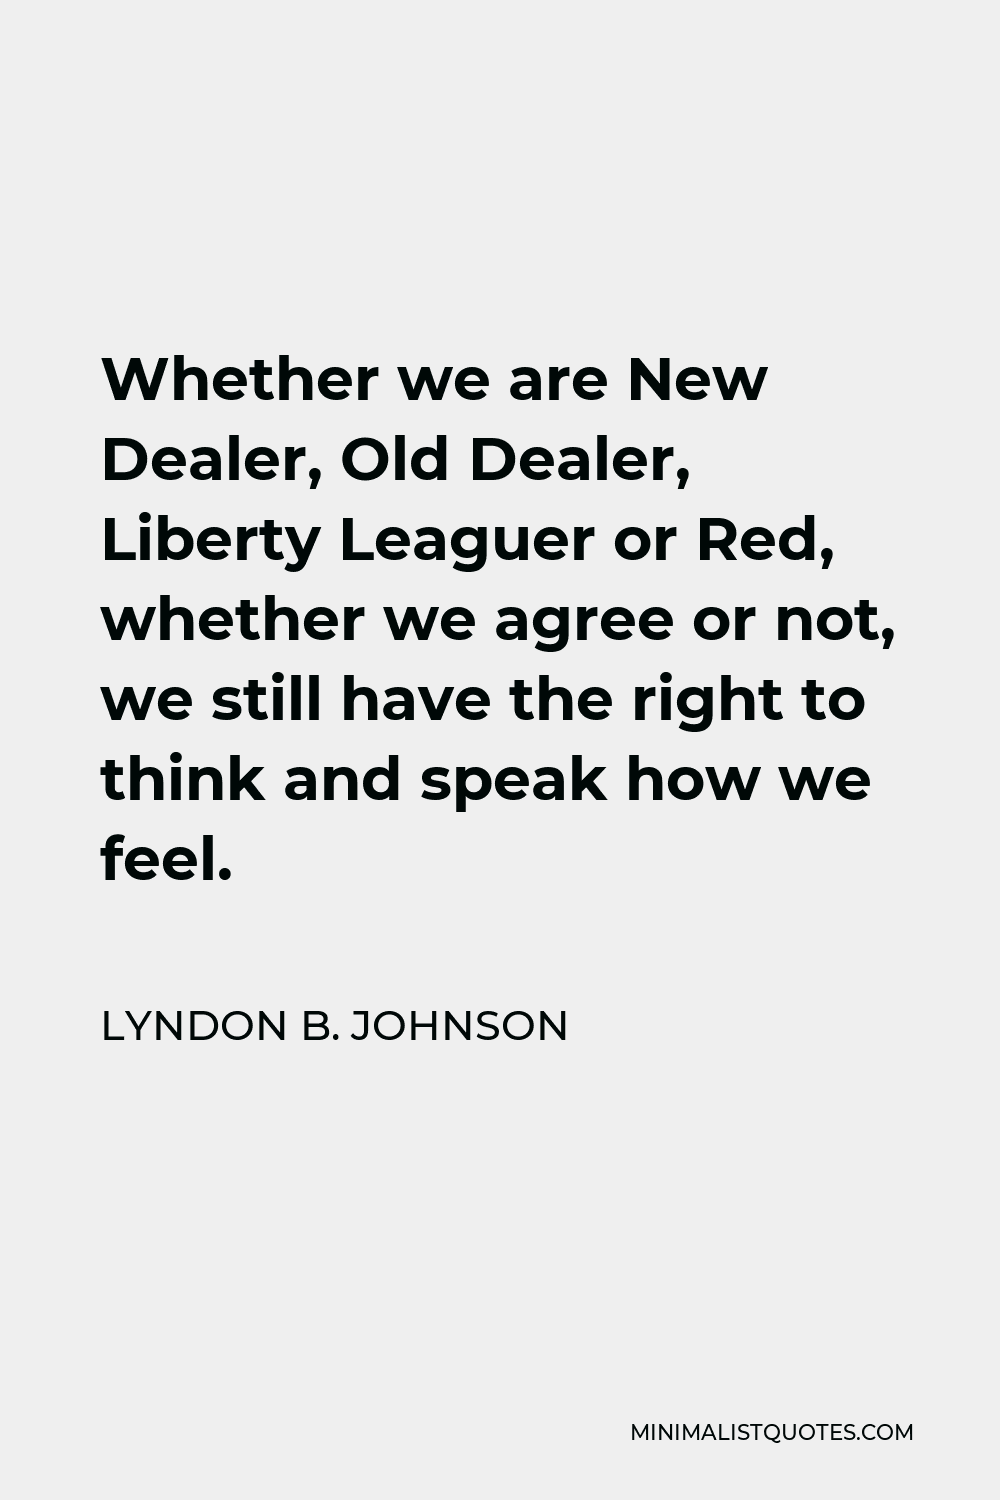 Lyndon B. Johnson Quote - Whether we are New Dealer, Old Dealer, Liberty Leaguer or Red, whether we agree or not, we still have the right to think and speak how we feel.